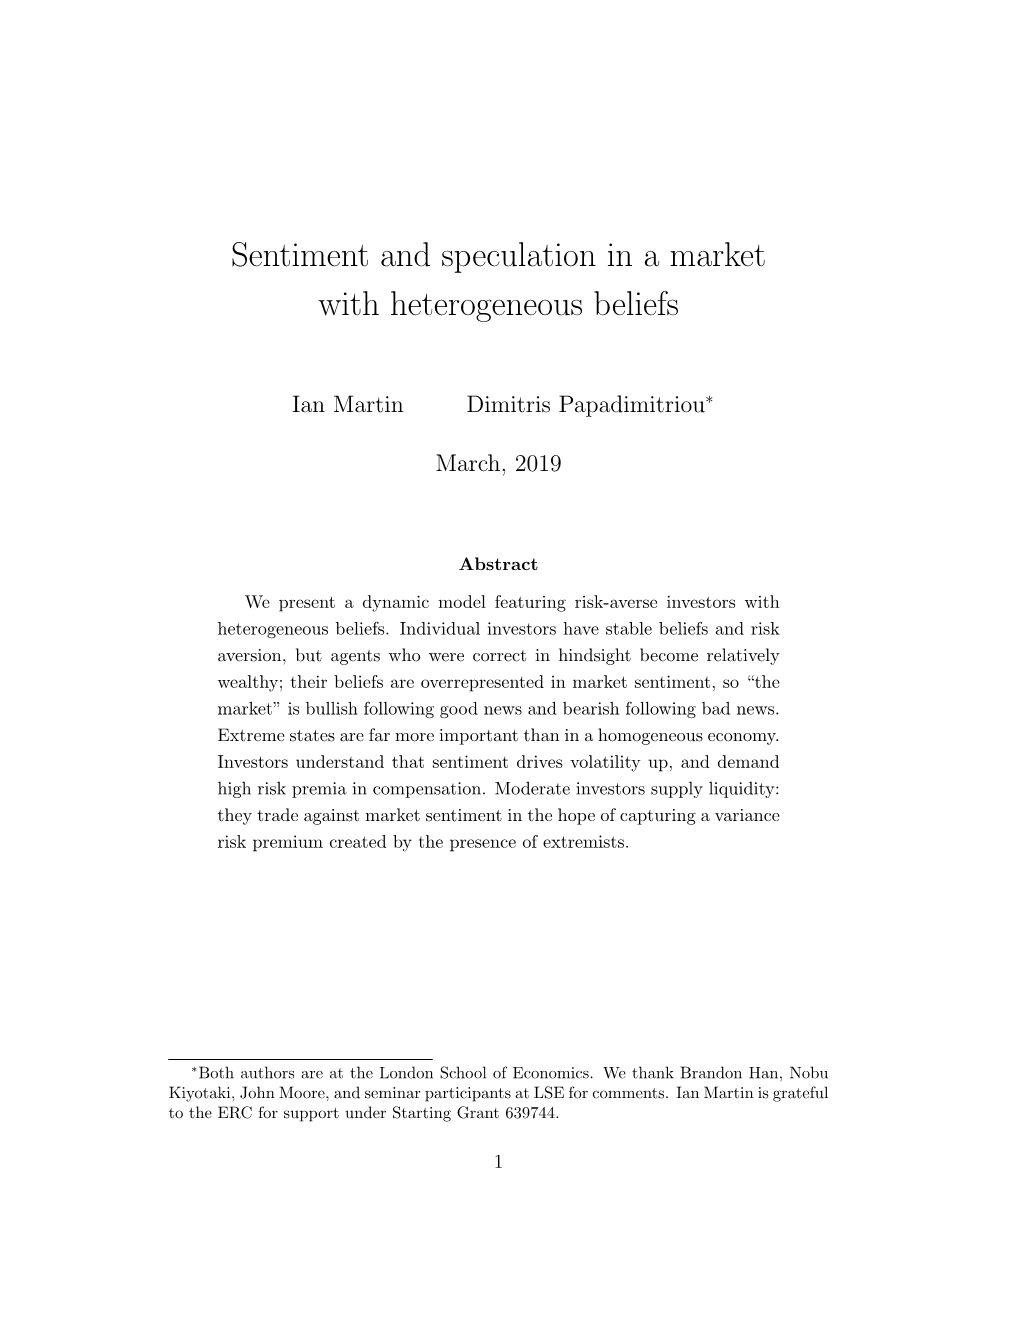 Sentiment and Speculation in a Market with Heterogeneous Beliefs